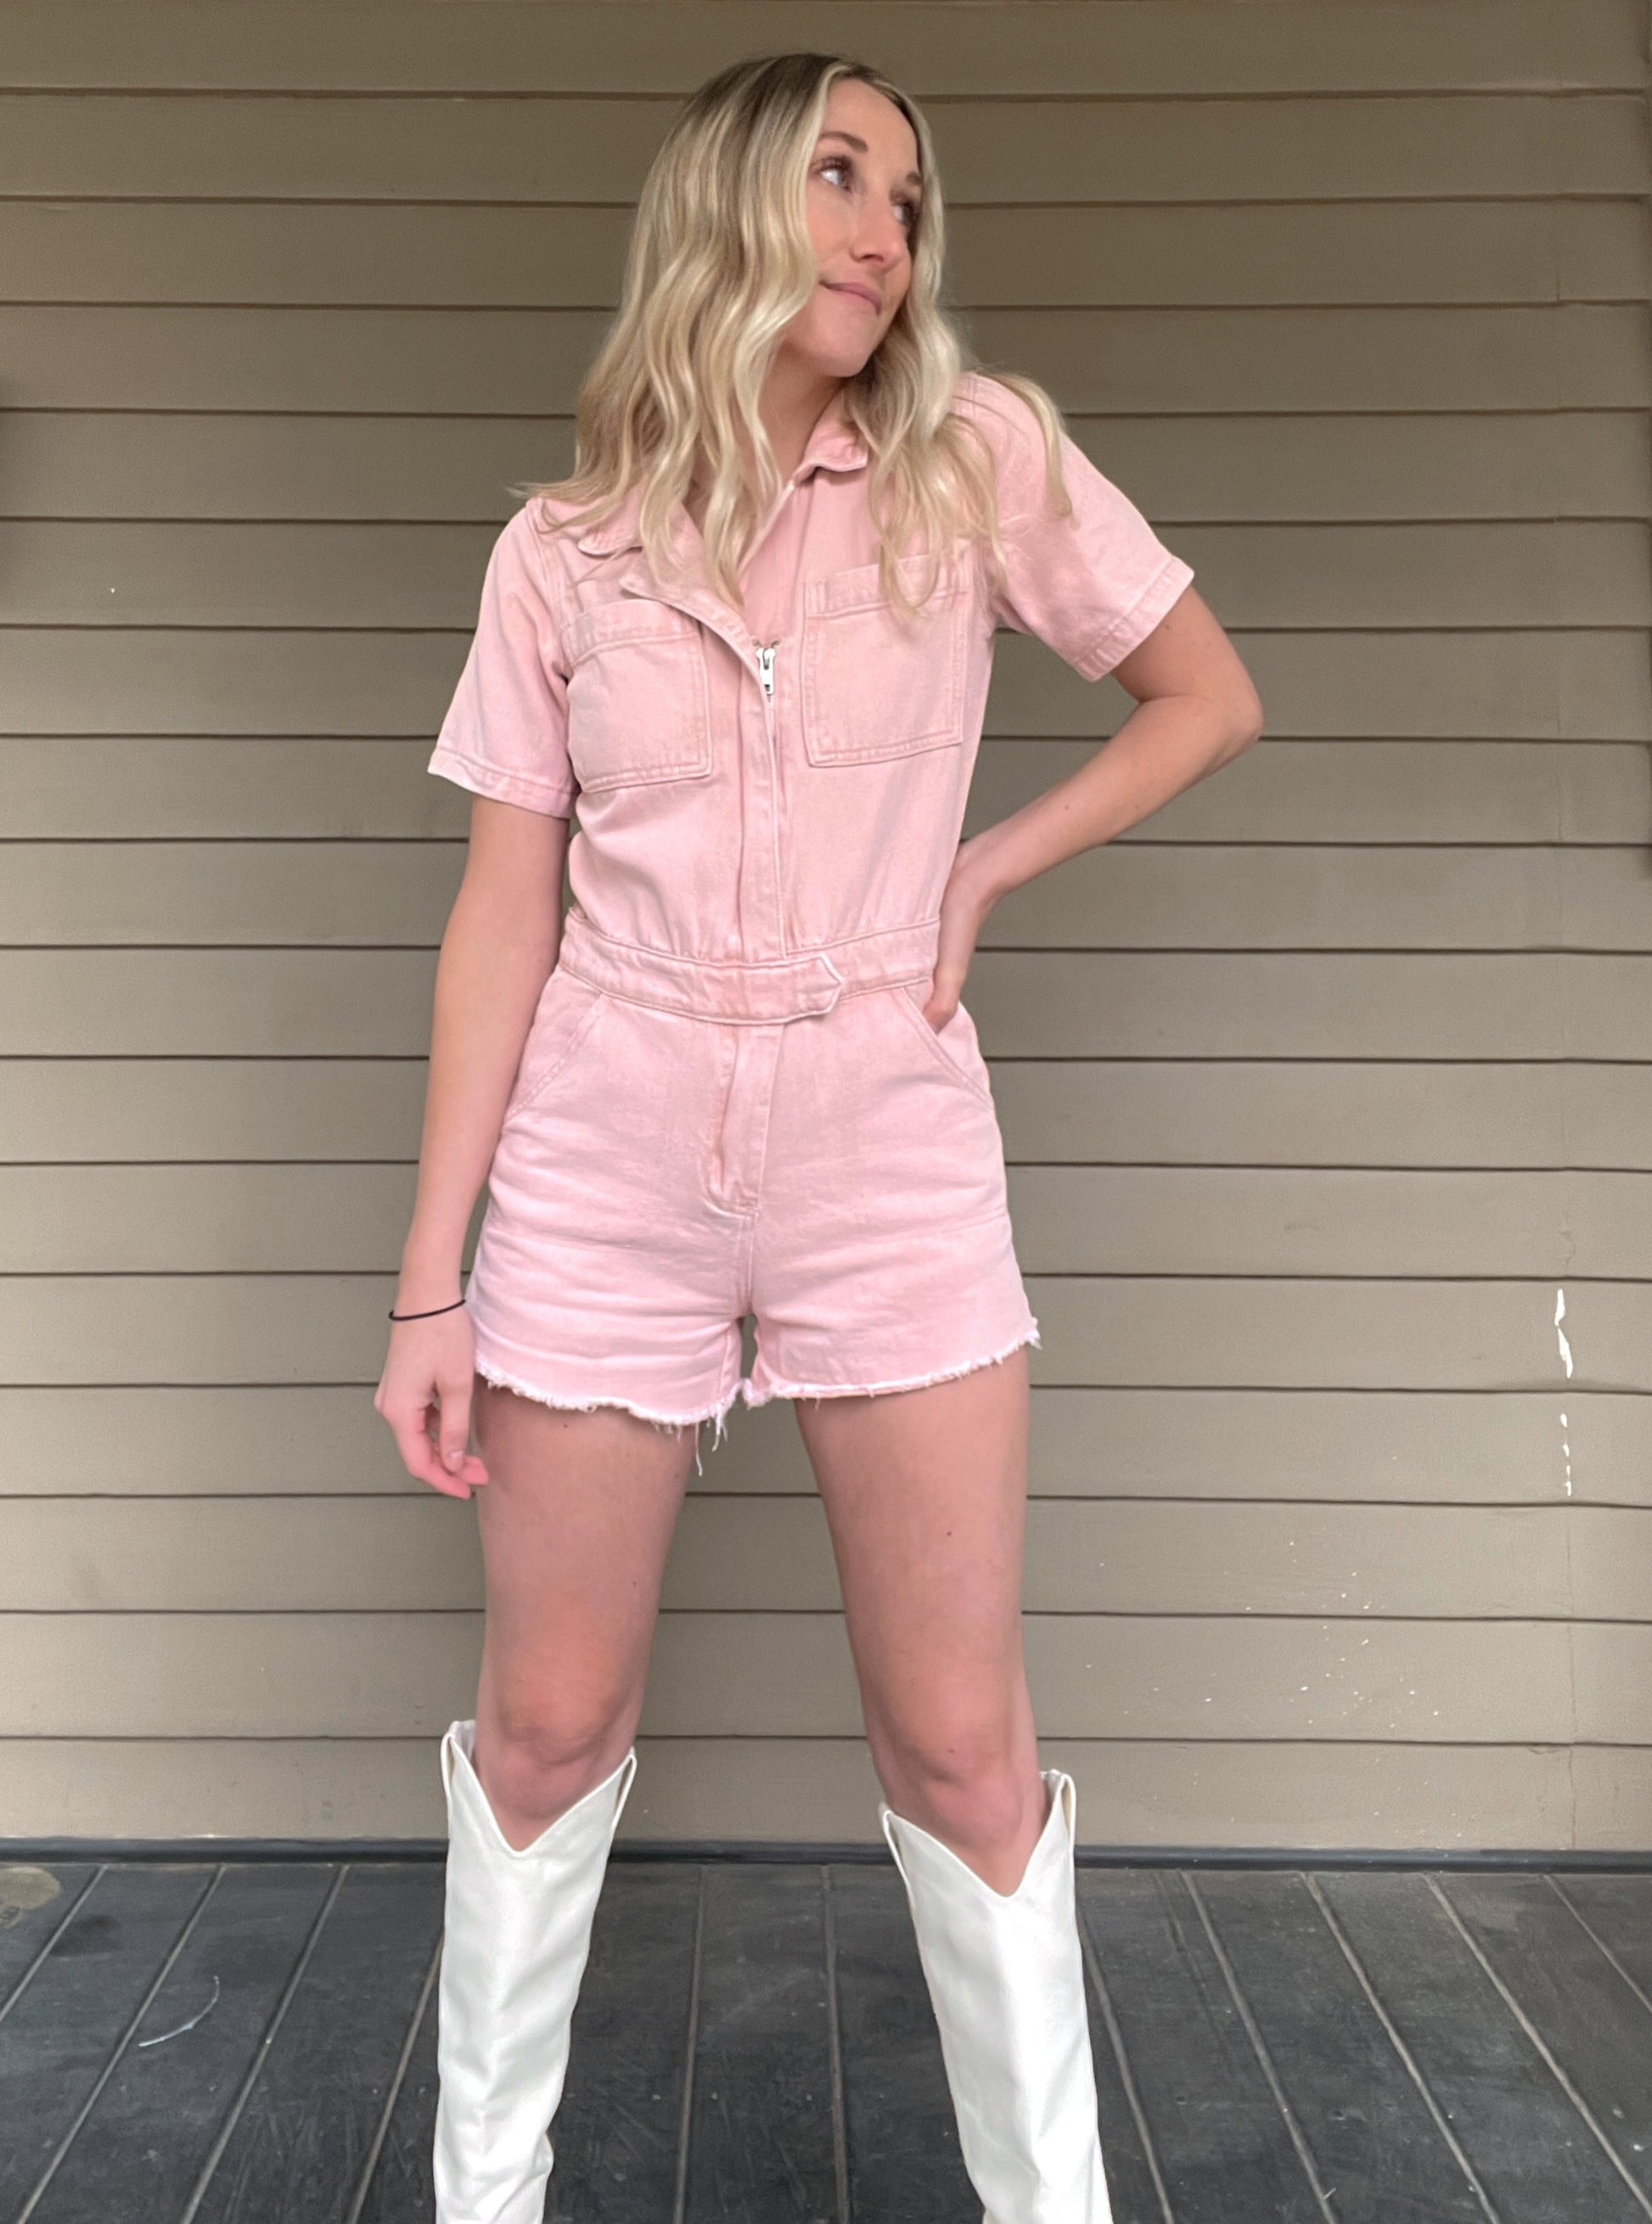 Adventure Denim Romper - Washed Pink  Denim Romper Zipper Pockets 100% Cotton Color: Washed Pink Ready for a wild adventure? The Adventurer Denim Romper is the perfect outfit for a daring escapade! The pink and button up design will keep you looking stylish, while the collar adds an air of sophistication - talk about an adventurers dream!